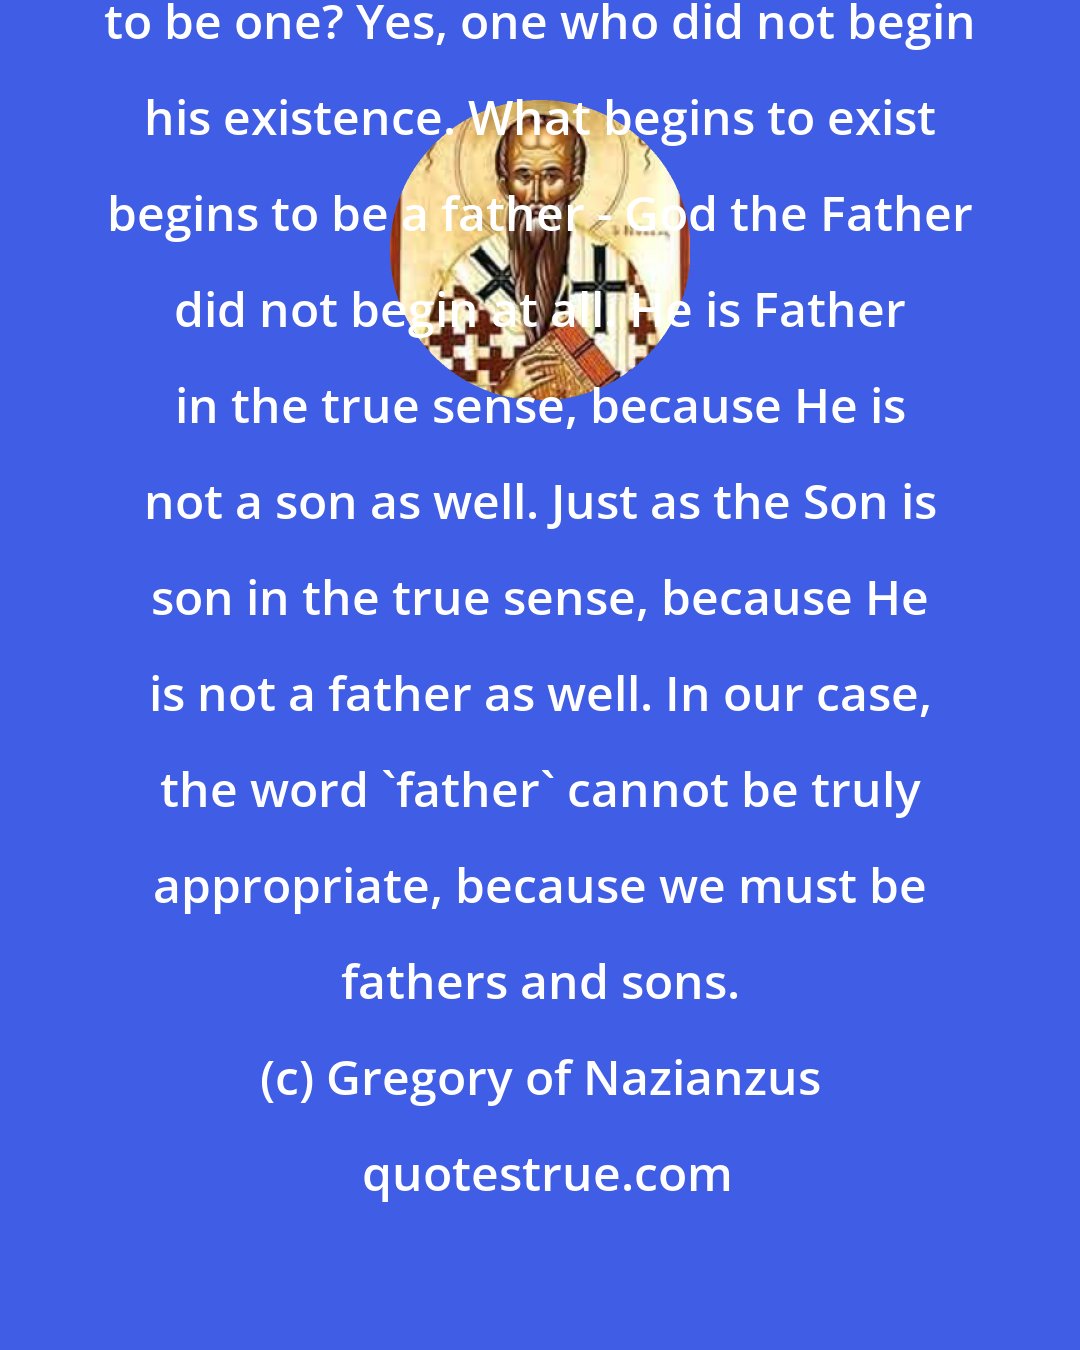 Gregory of Nazianzus: Can anyone be a father without beginning to be one? Yes, one who did not begin his existence. What begins to exist begins to be a father - God the Father did not begin at all. He is Father in the true sense, because He is not a son as well. Just as the Son is son in the true sense, because He is not a father as well. In our case, the word 'father' cannot be truly appropriate, because we must be fathers and sons.